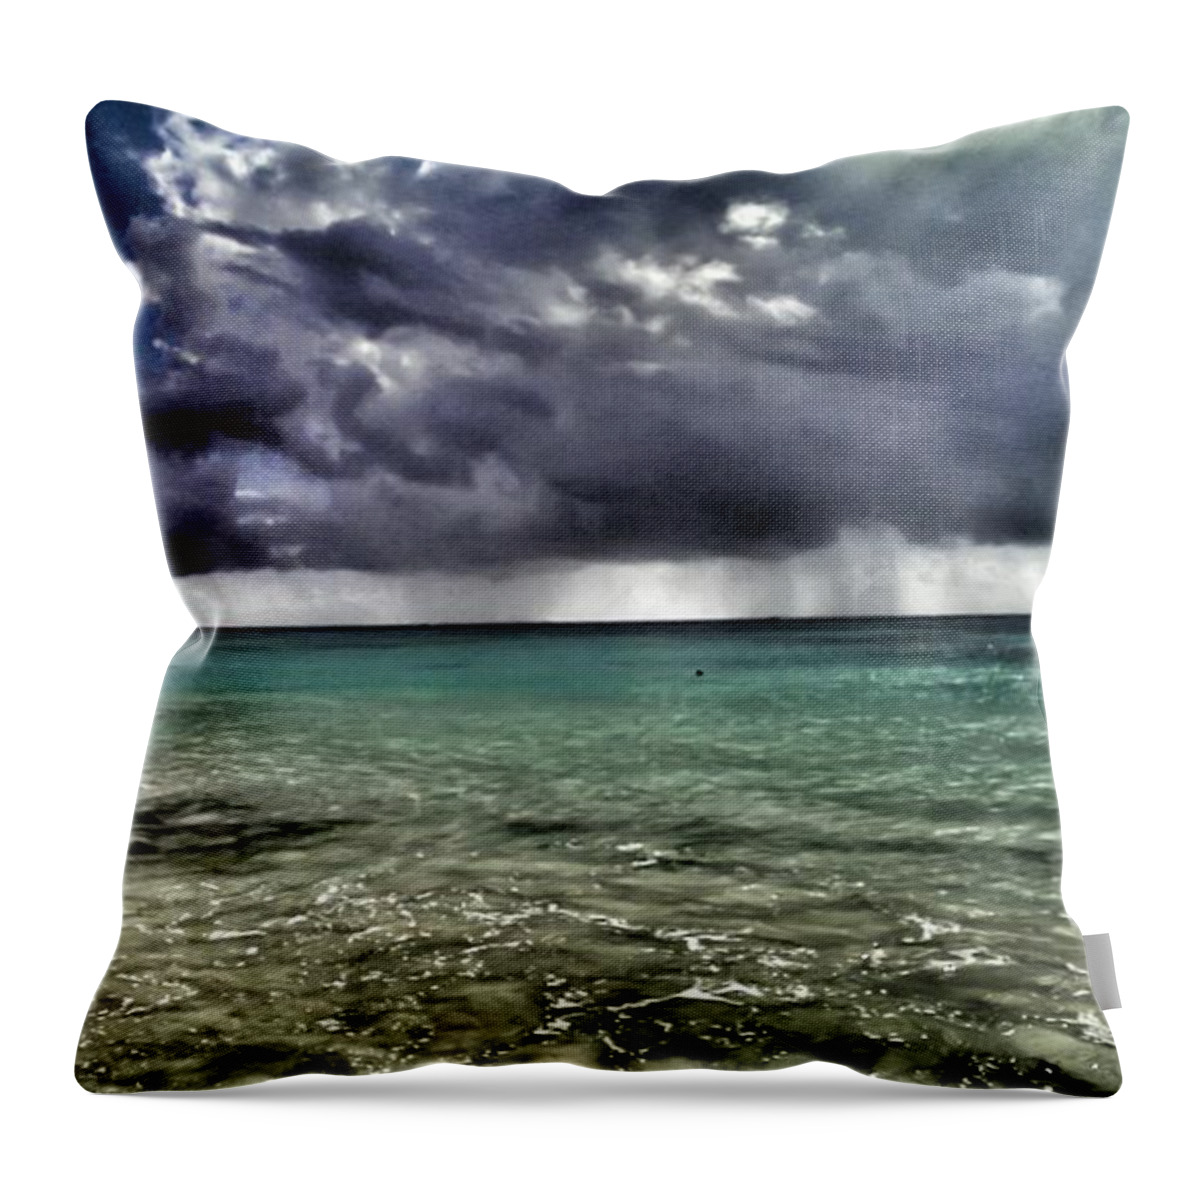 Ocean Throw Pillow featuring the photograph Stormy Paradise by Fabio Hering